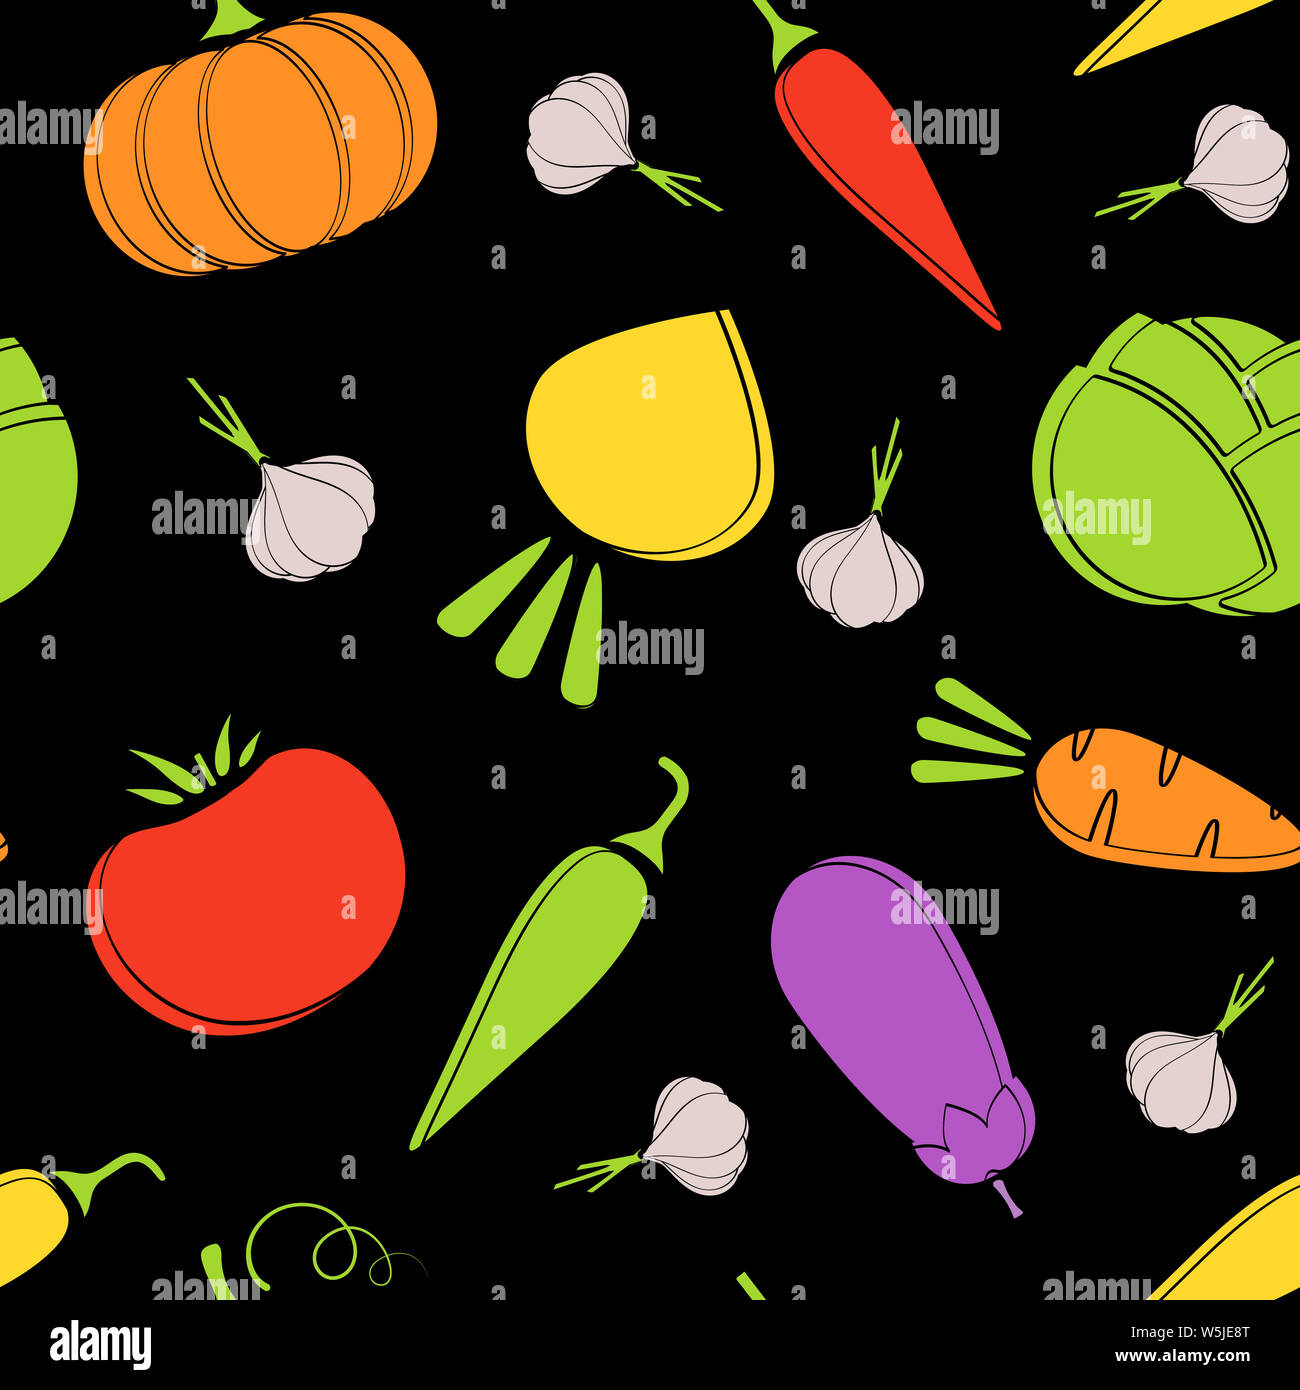 Outline seamless vegetable pattern flat illustration. Modern black pattern design with autumn vegetable seamless texture in natural colors for healthy diet decor or vintage wallpaper Stock Photo